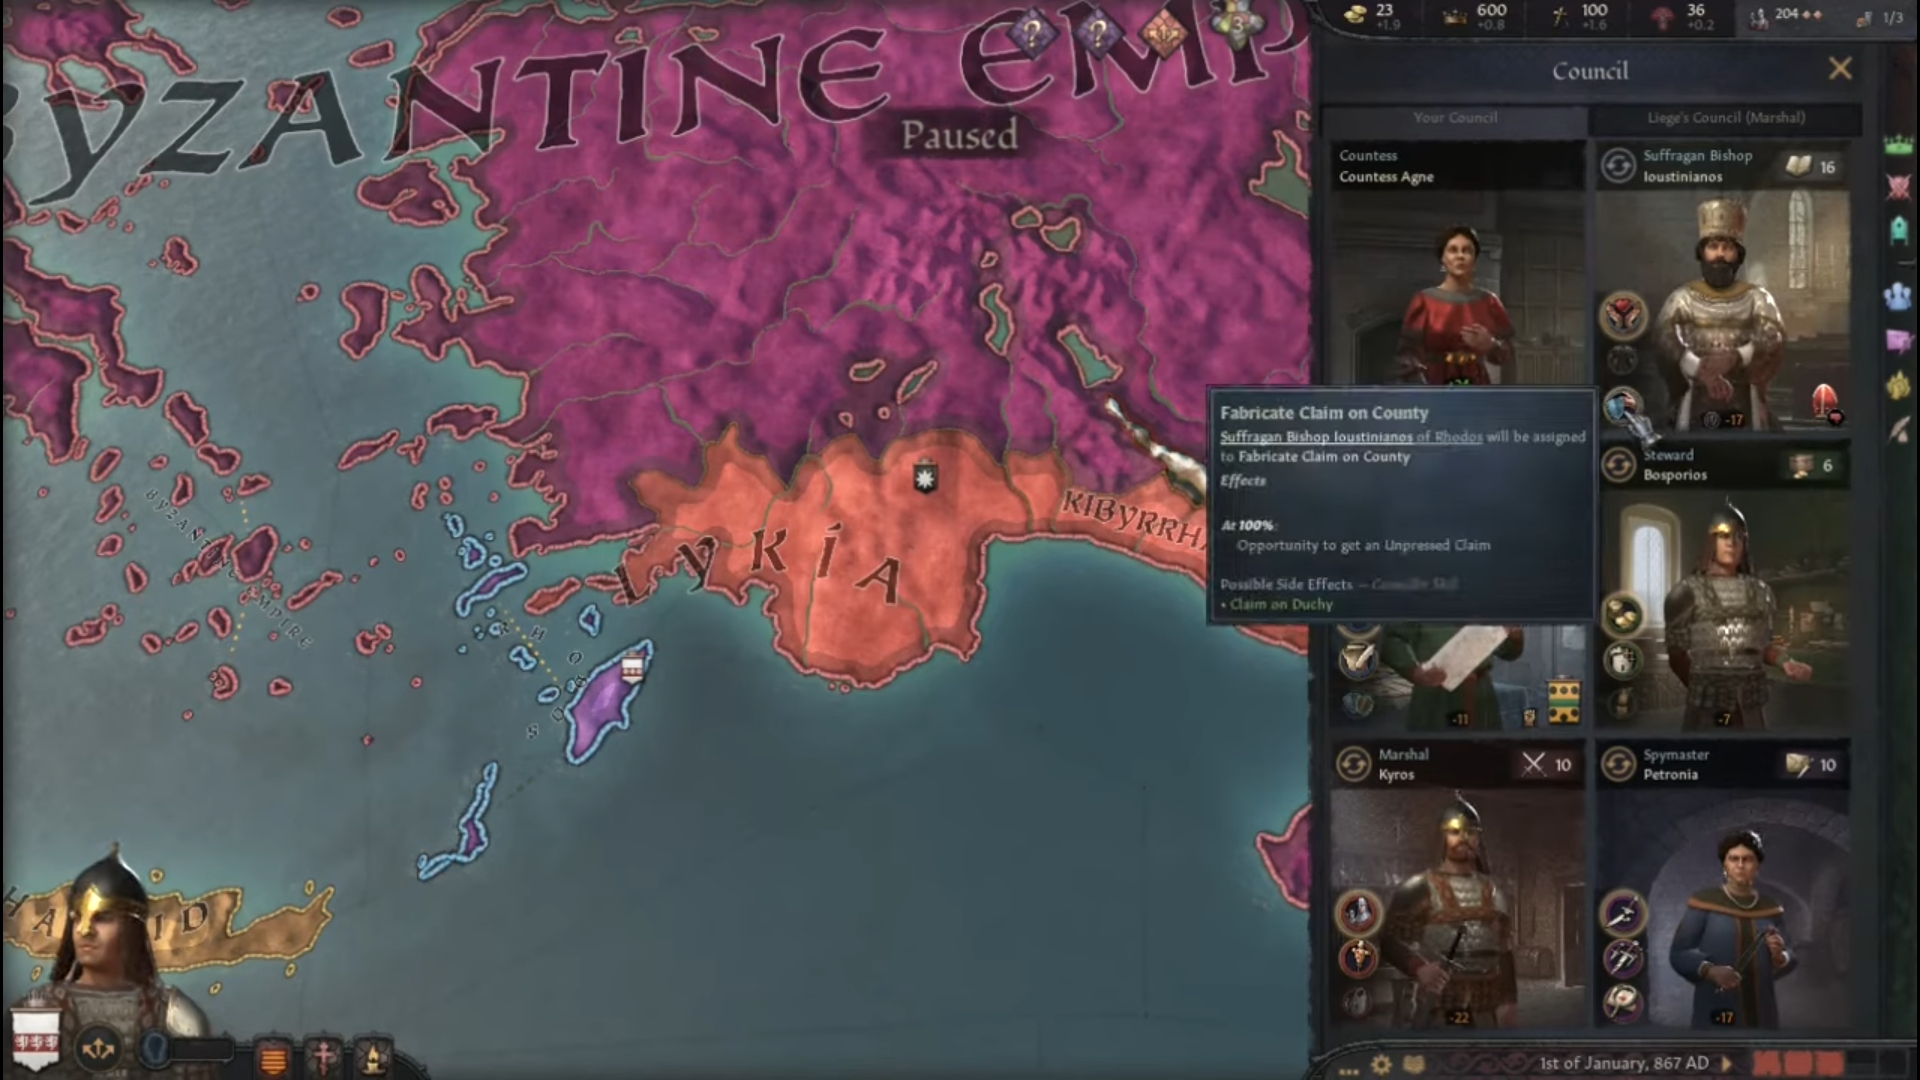 How to Fabricate a Claim in Crusader Kings 3